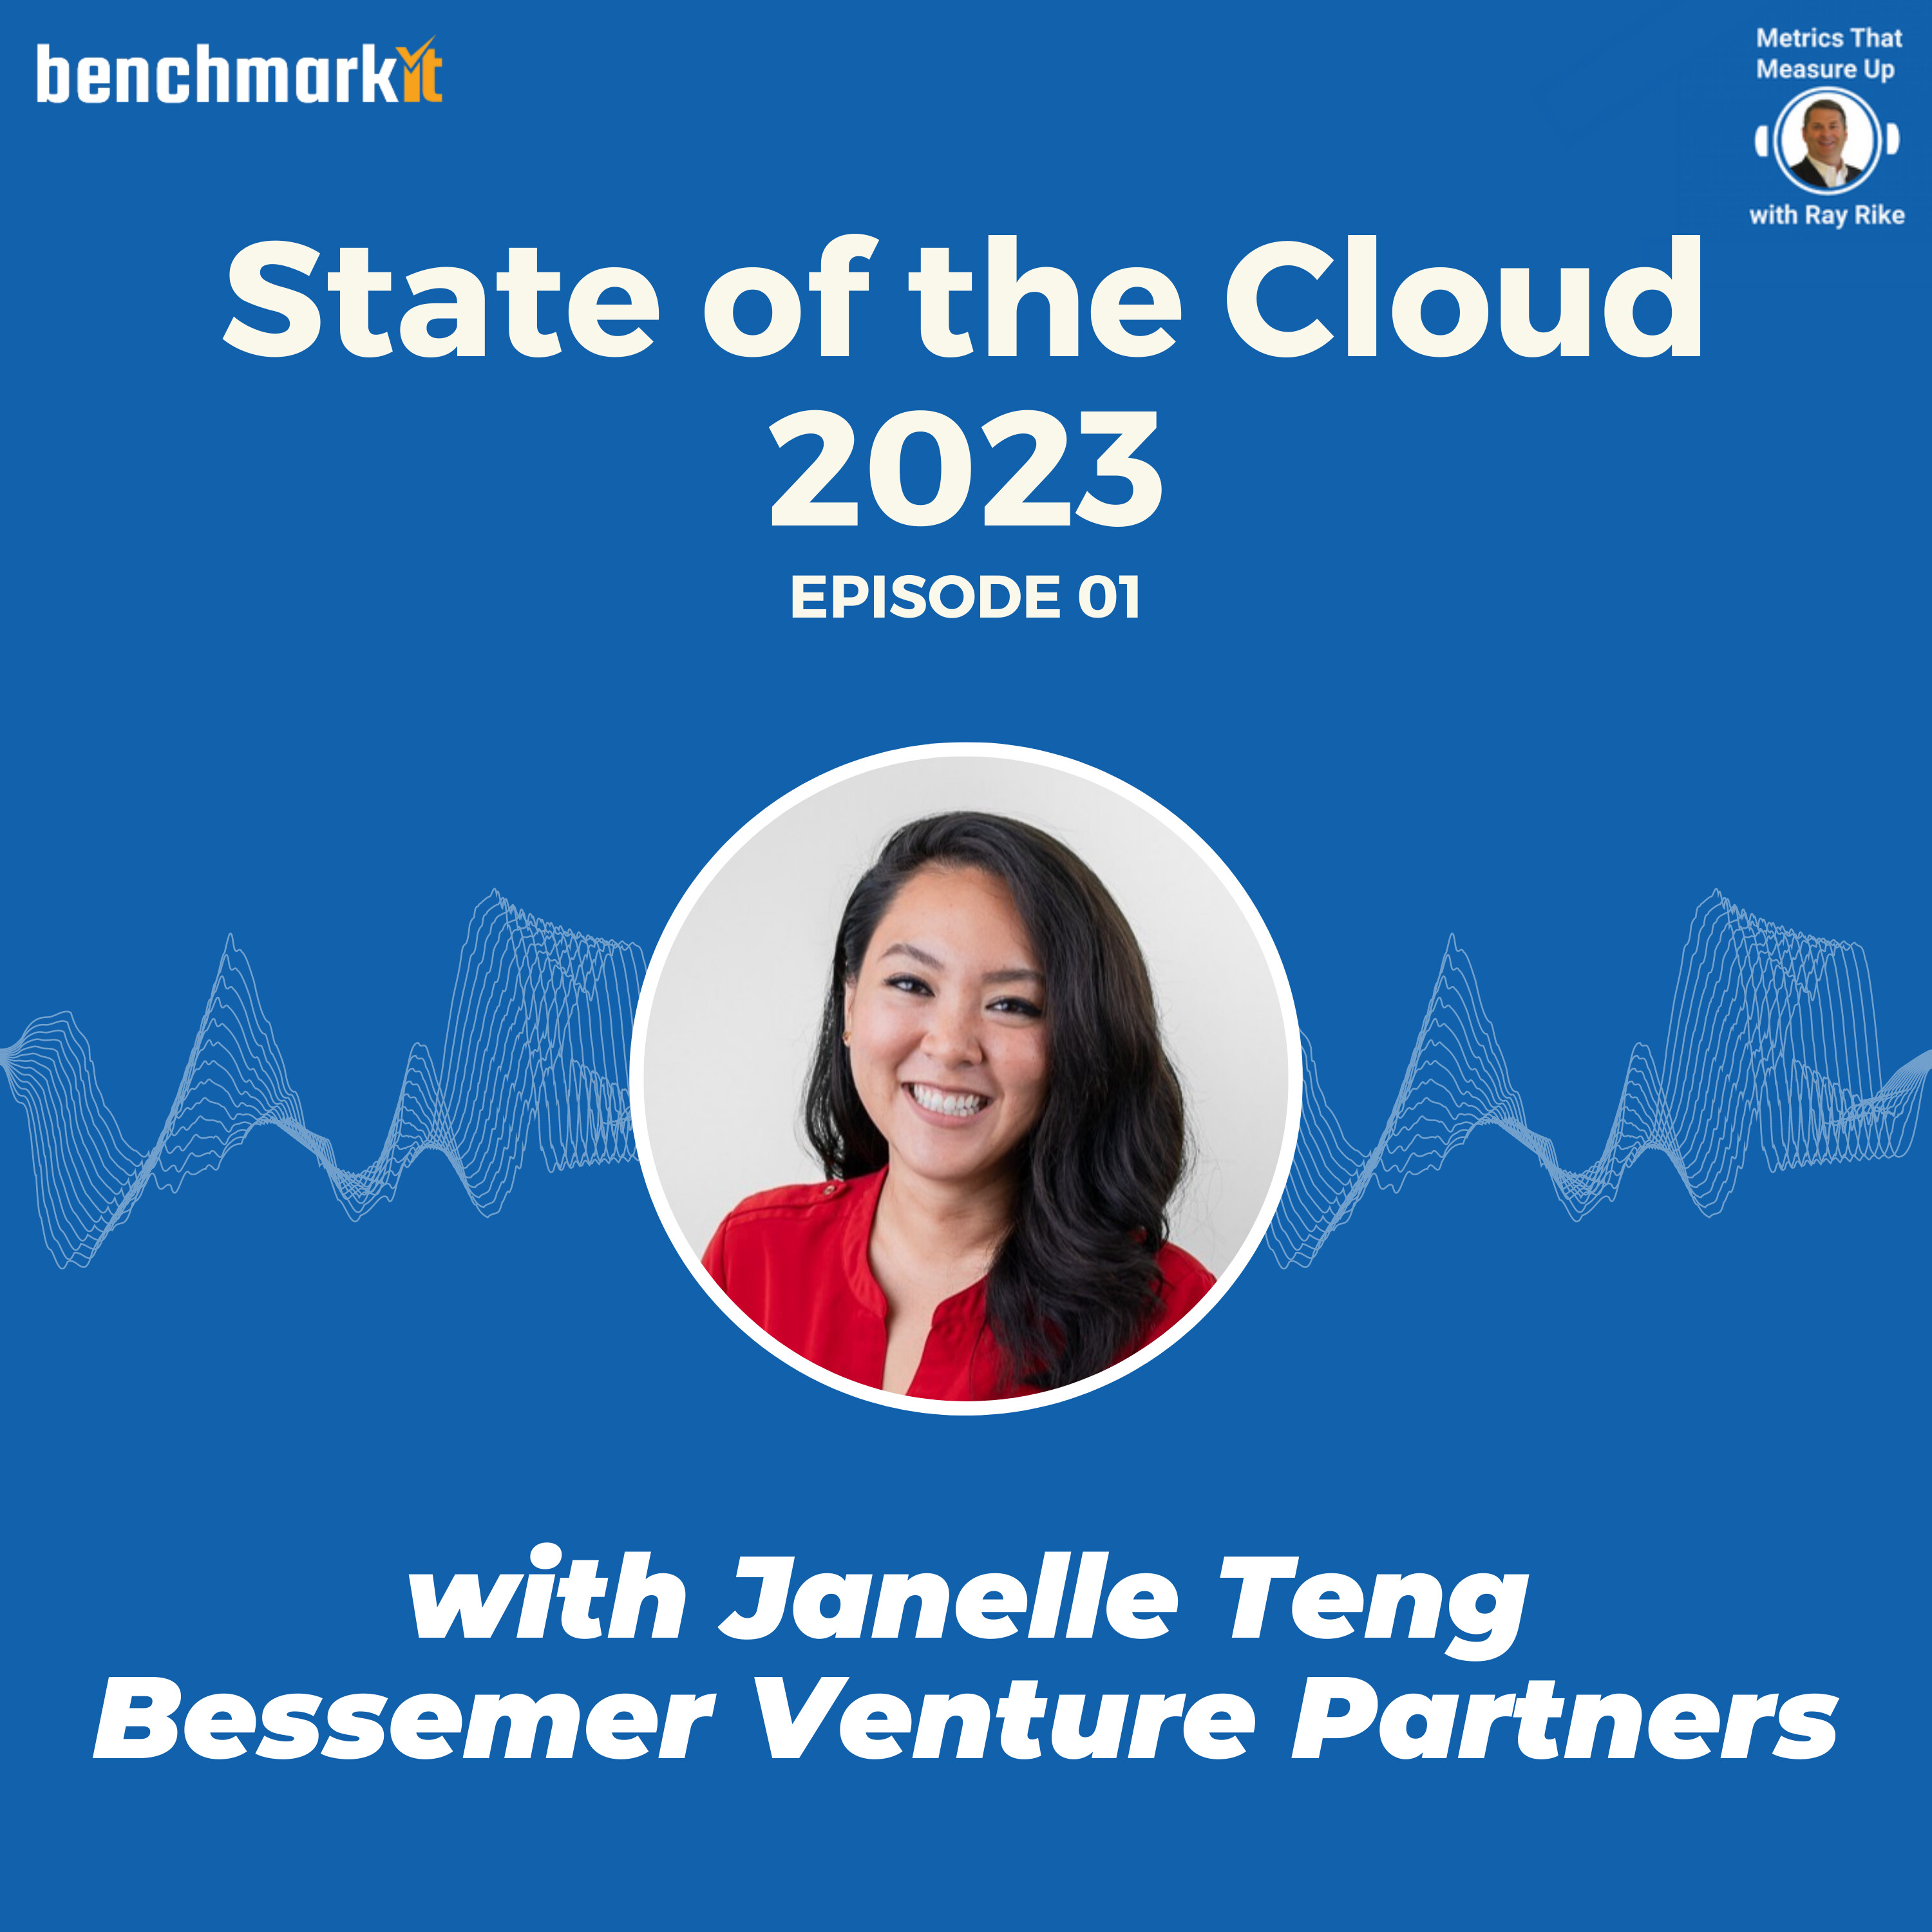 State of the Cloud 2023 - Top Five Predictions with Janelle Teng, Bessemer Venture Partners (Episode #2)